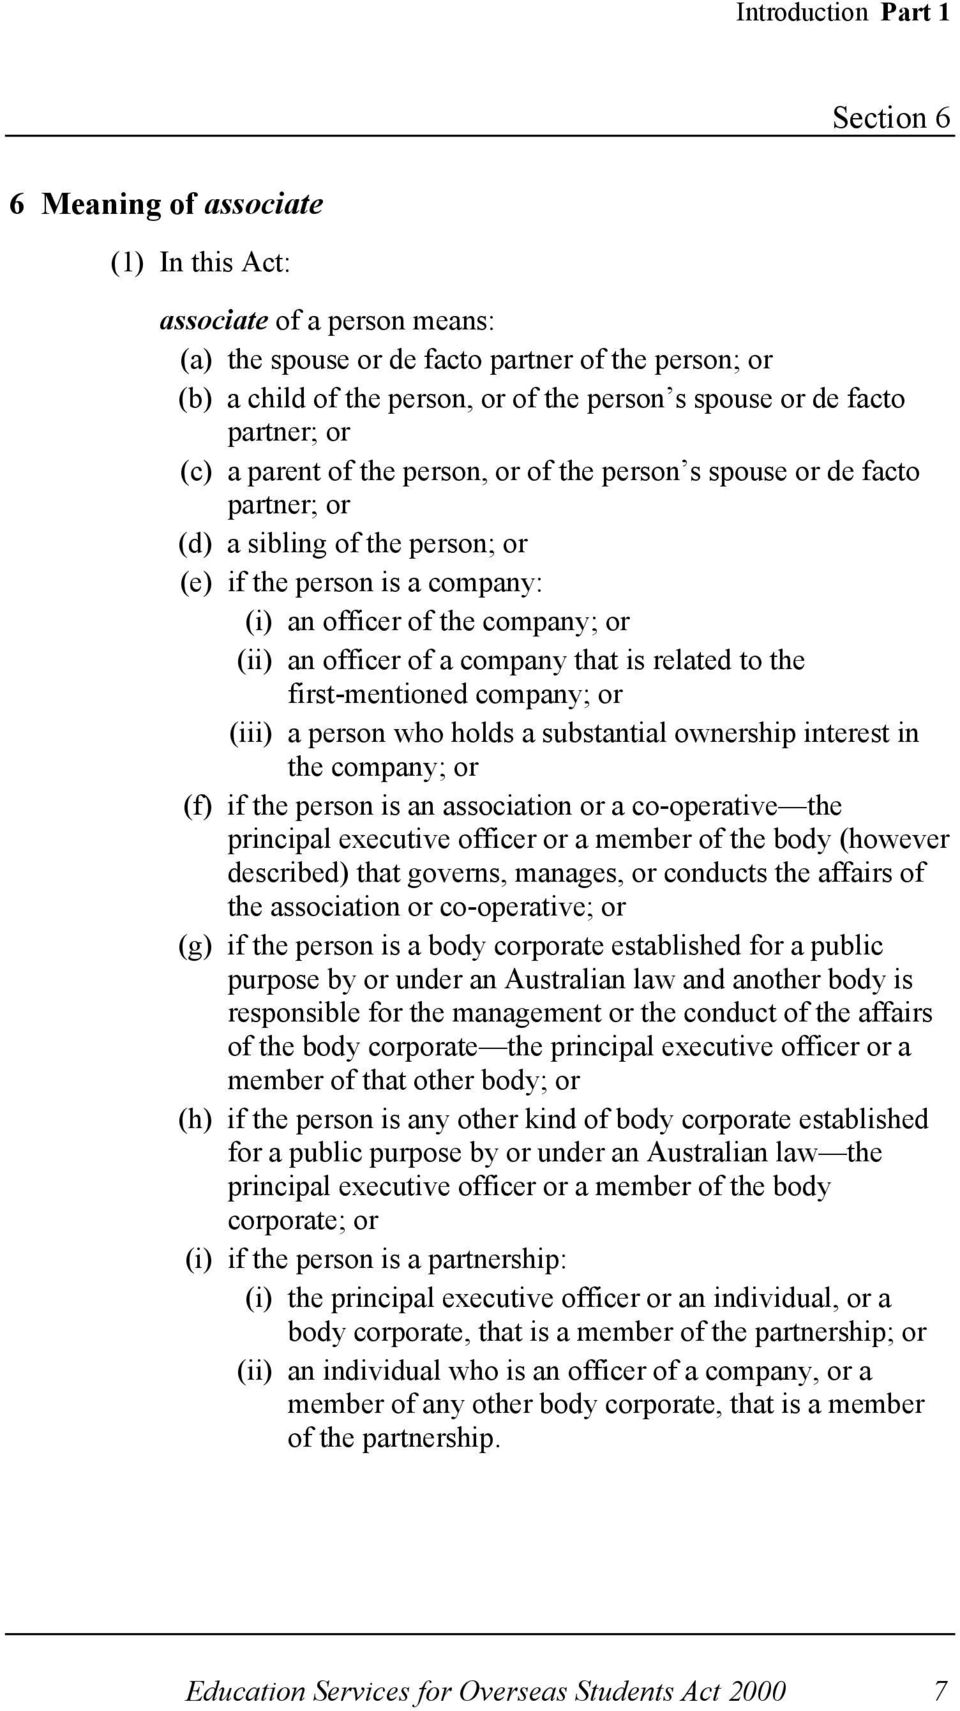 company; or (ii) an officer of a company that is related to the first-mentioned company; or (iii) a person who holds a substantial ownership interest in the company; or (f) if the person is an